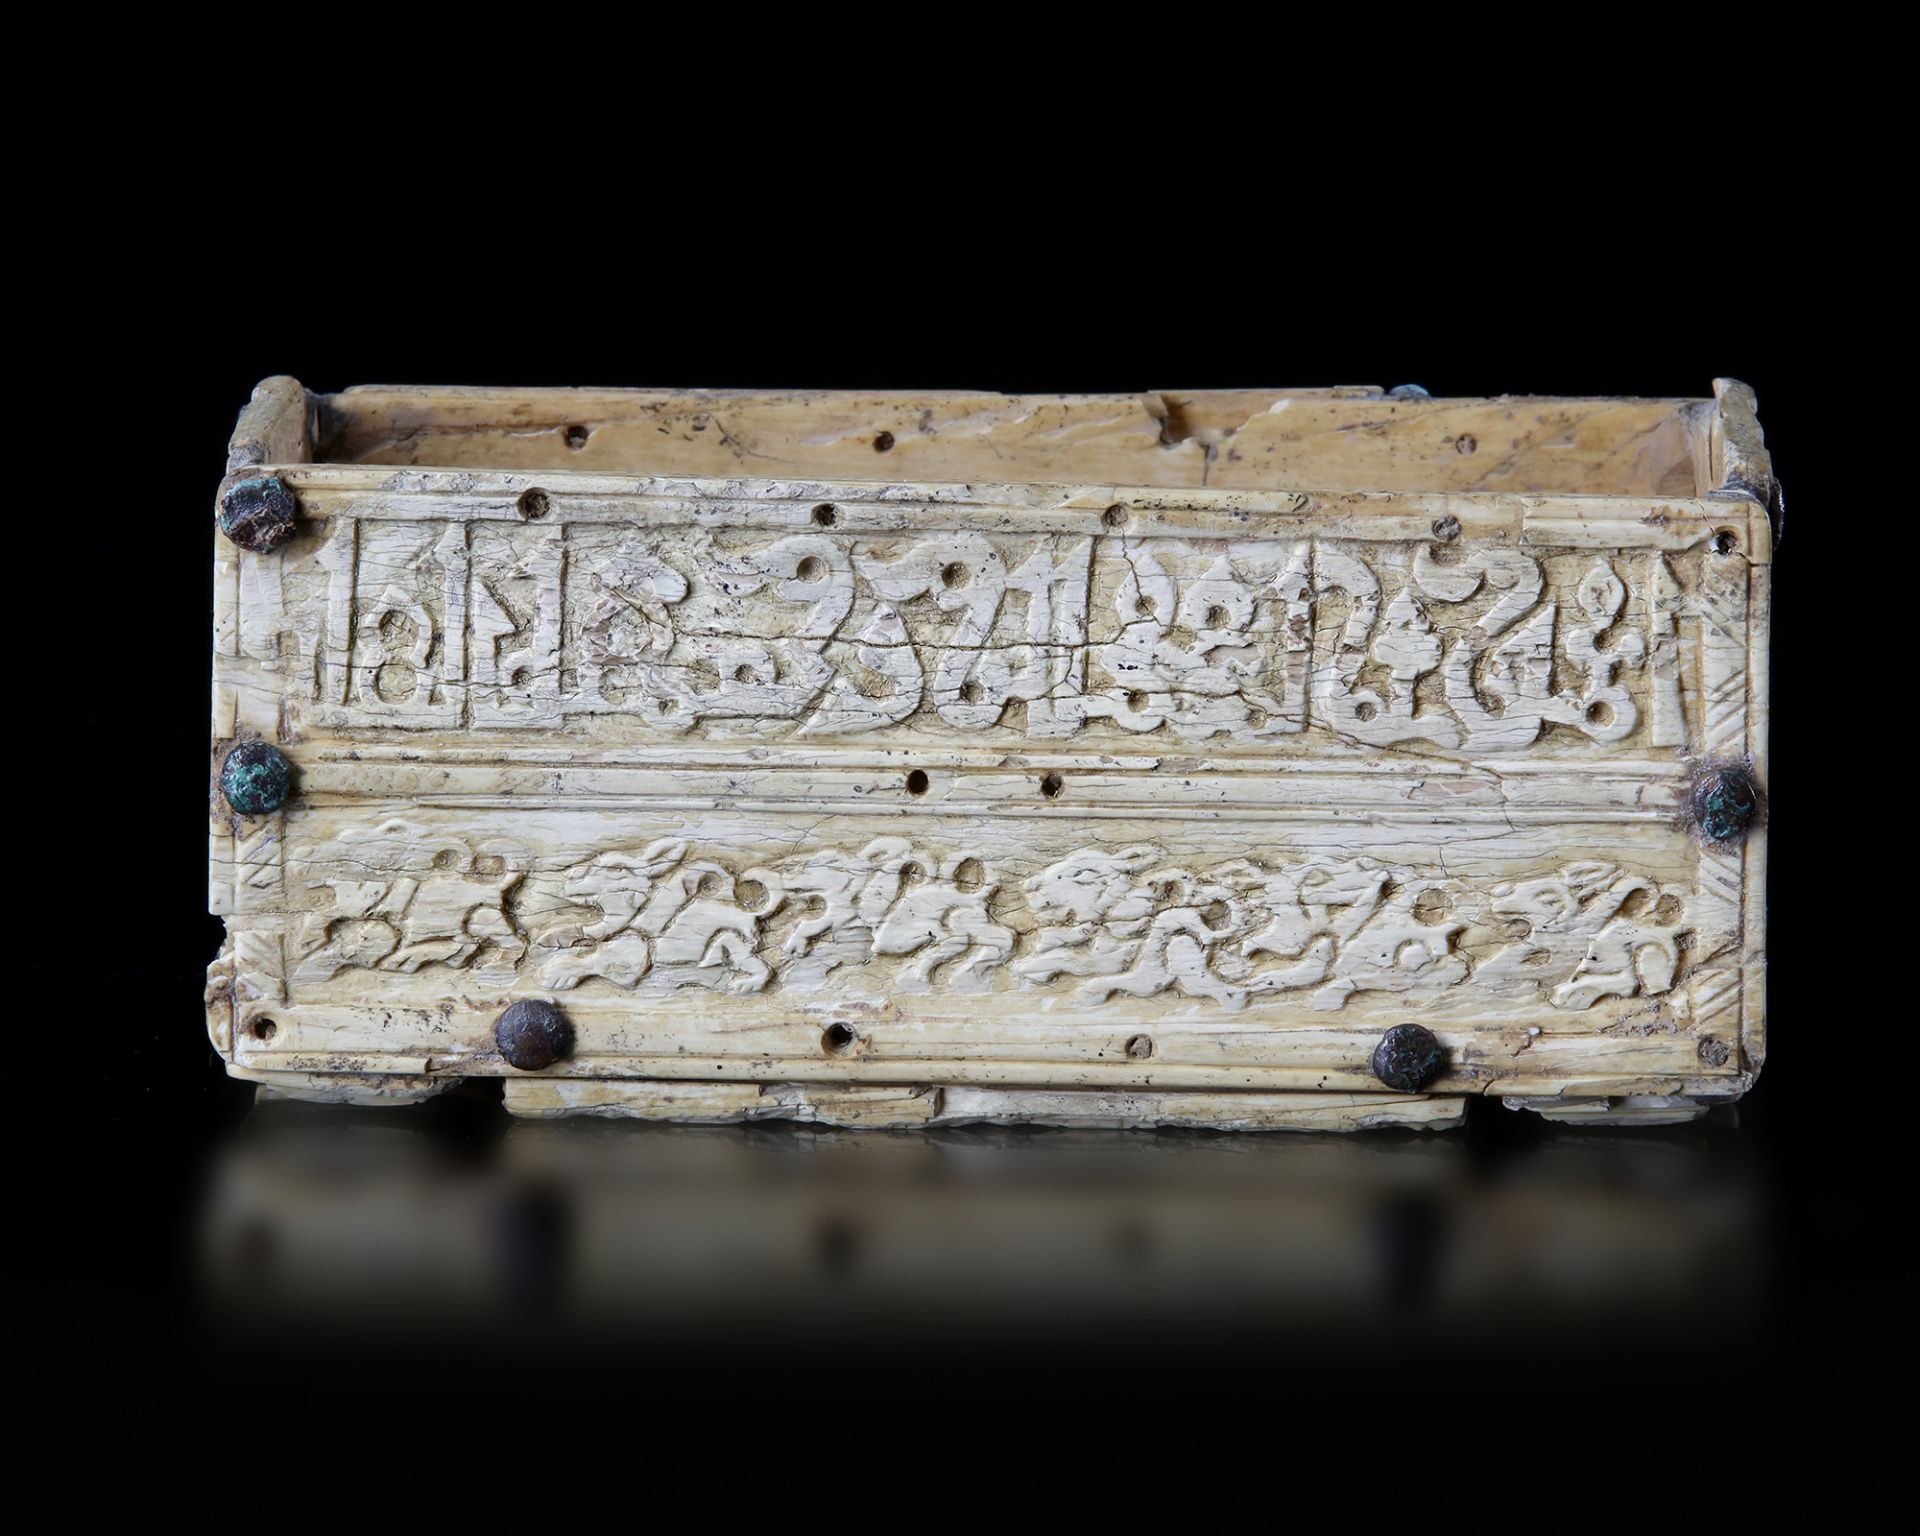 A FATIMID IVORY CARVED BOX, EGYPT OR SYRIA, 10TH-11TH CENTURY - Image 2 of 5